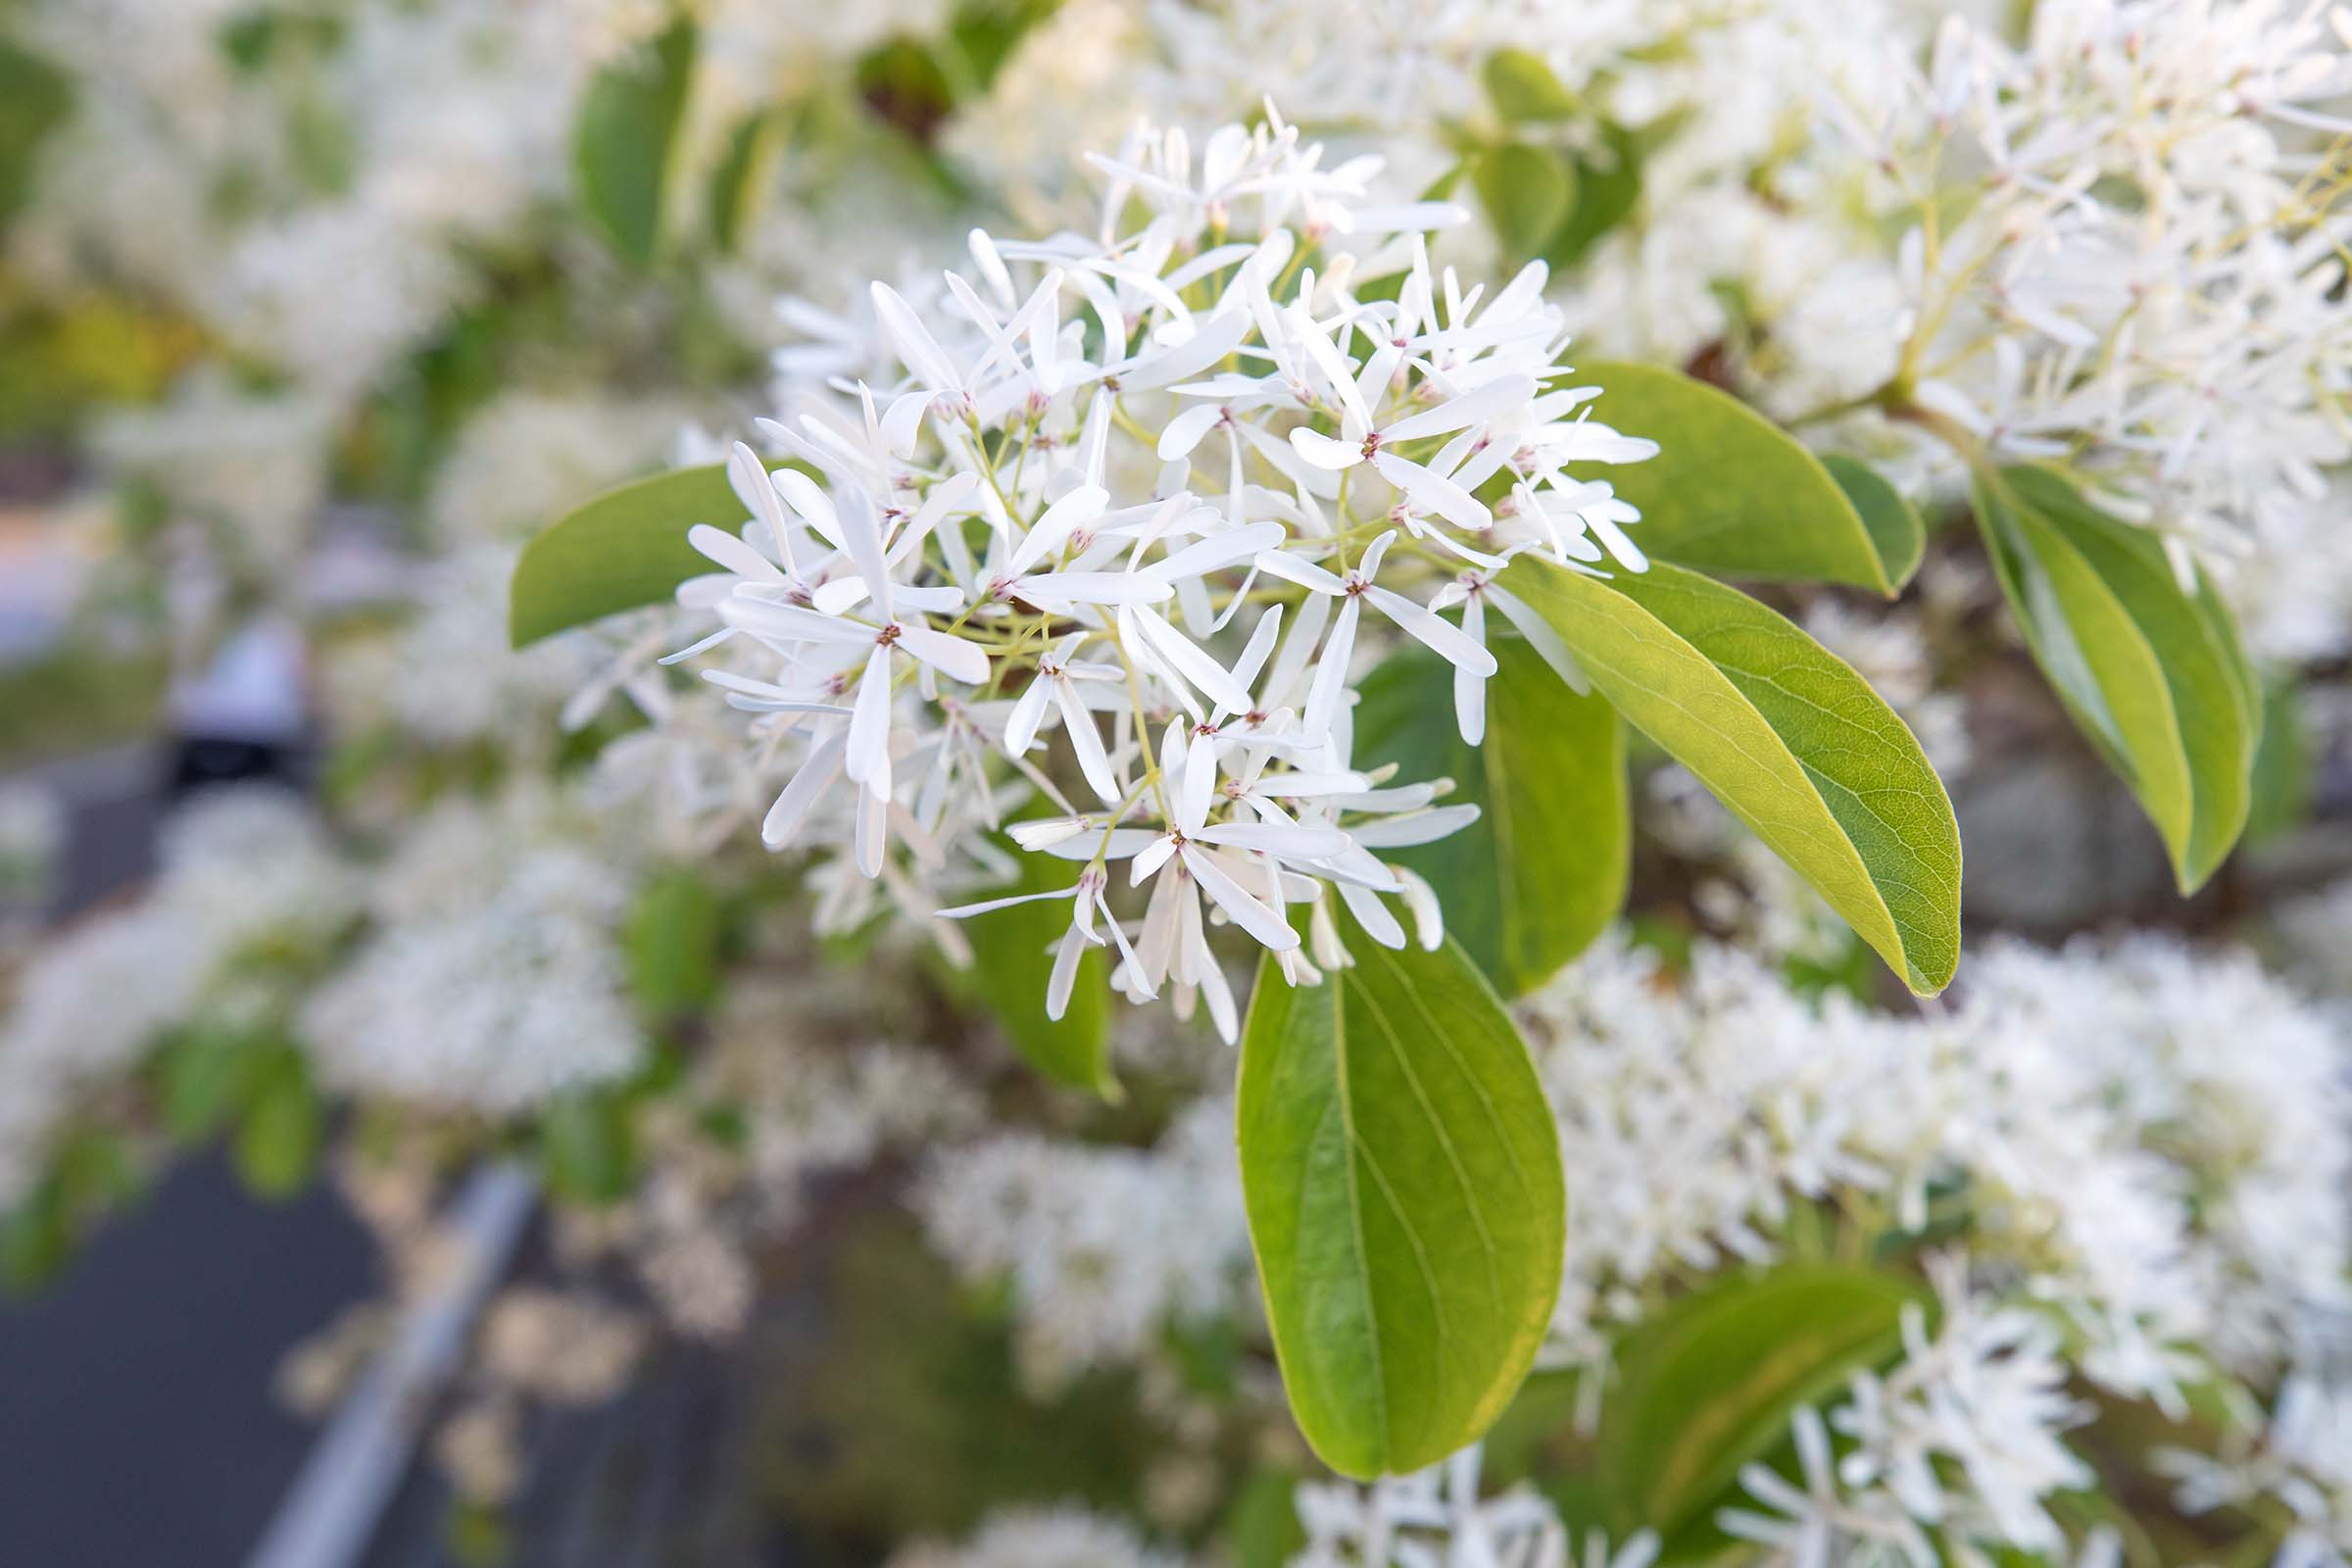 A close up on the blossoms of the fringe trees resembles a pom pom